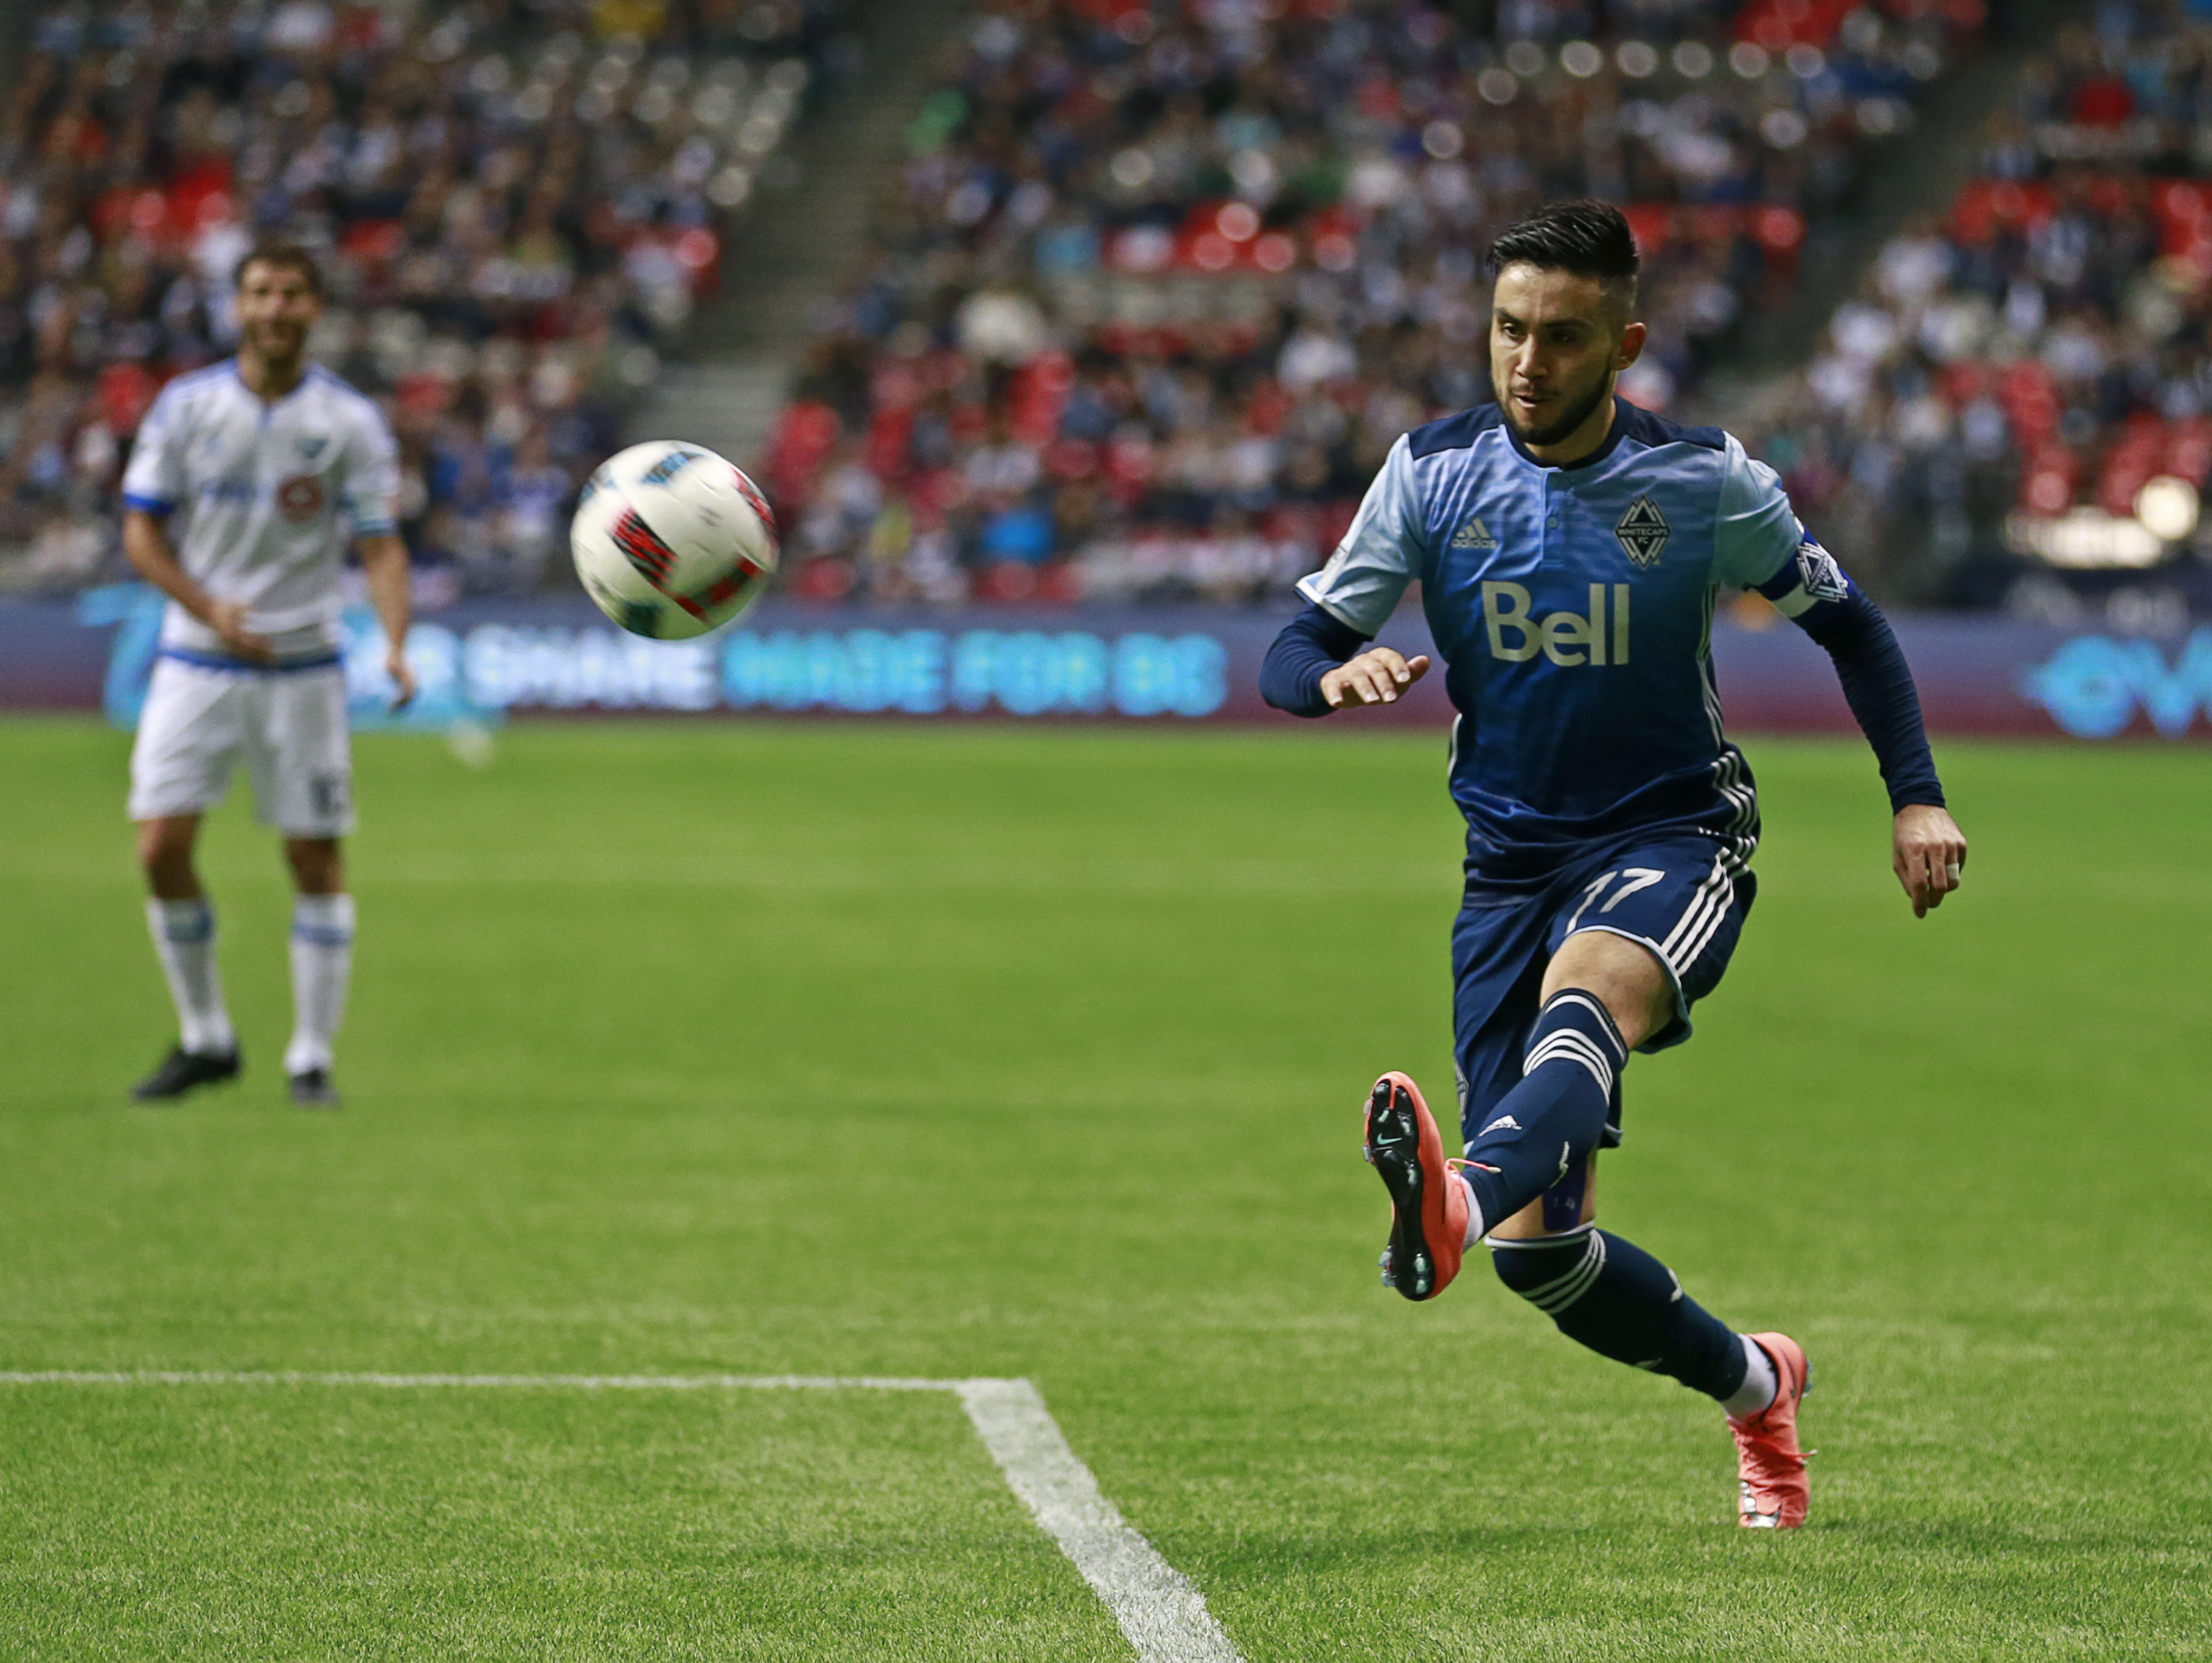 Vancouver Whitecaps can’t be this reliant on Pedro Morales